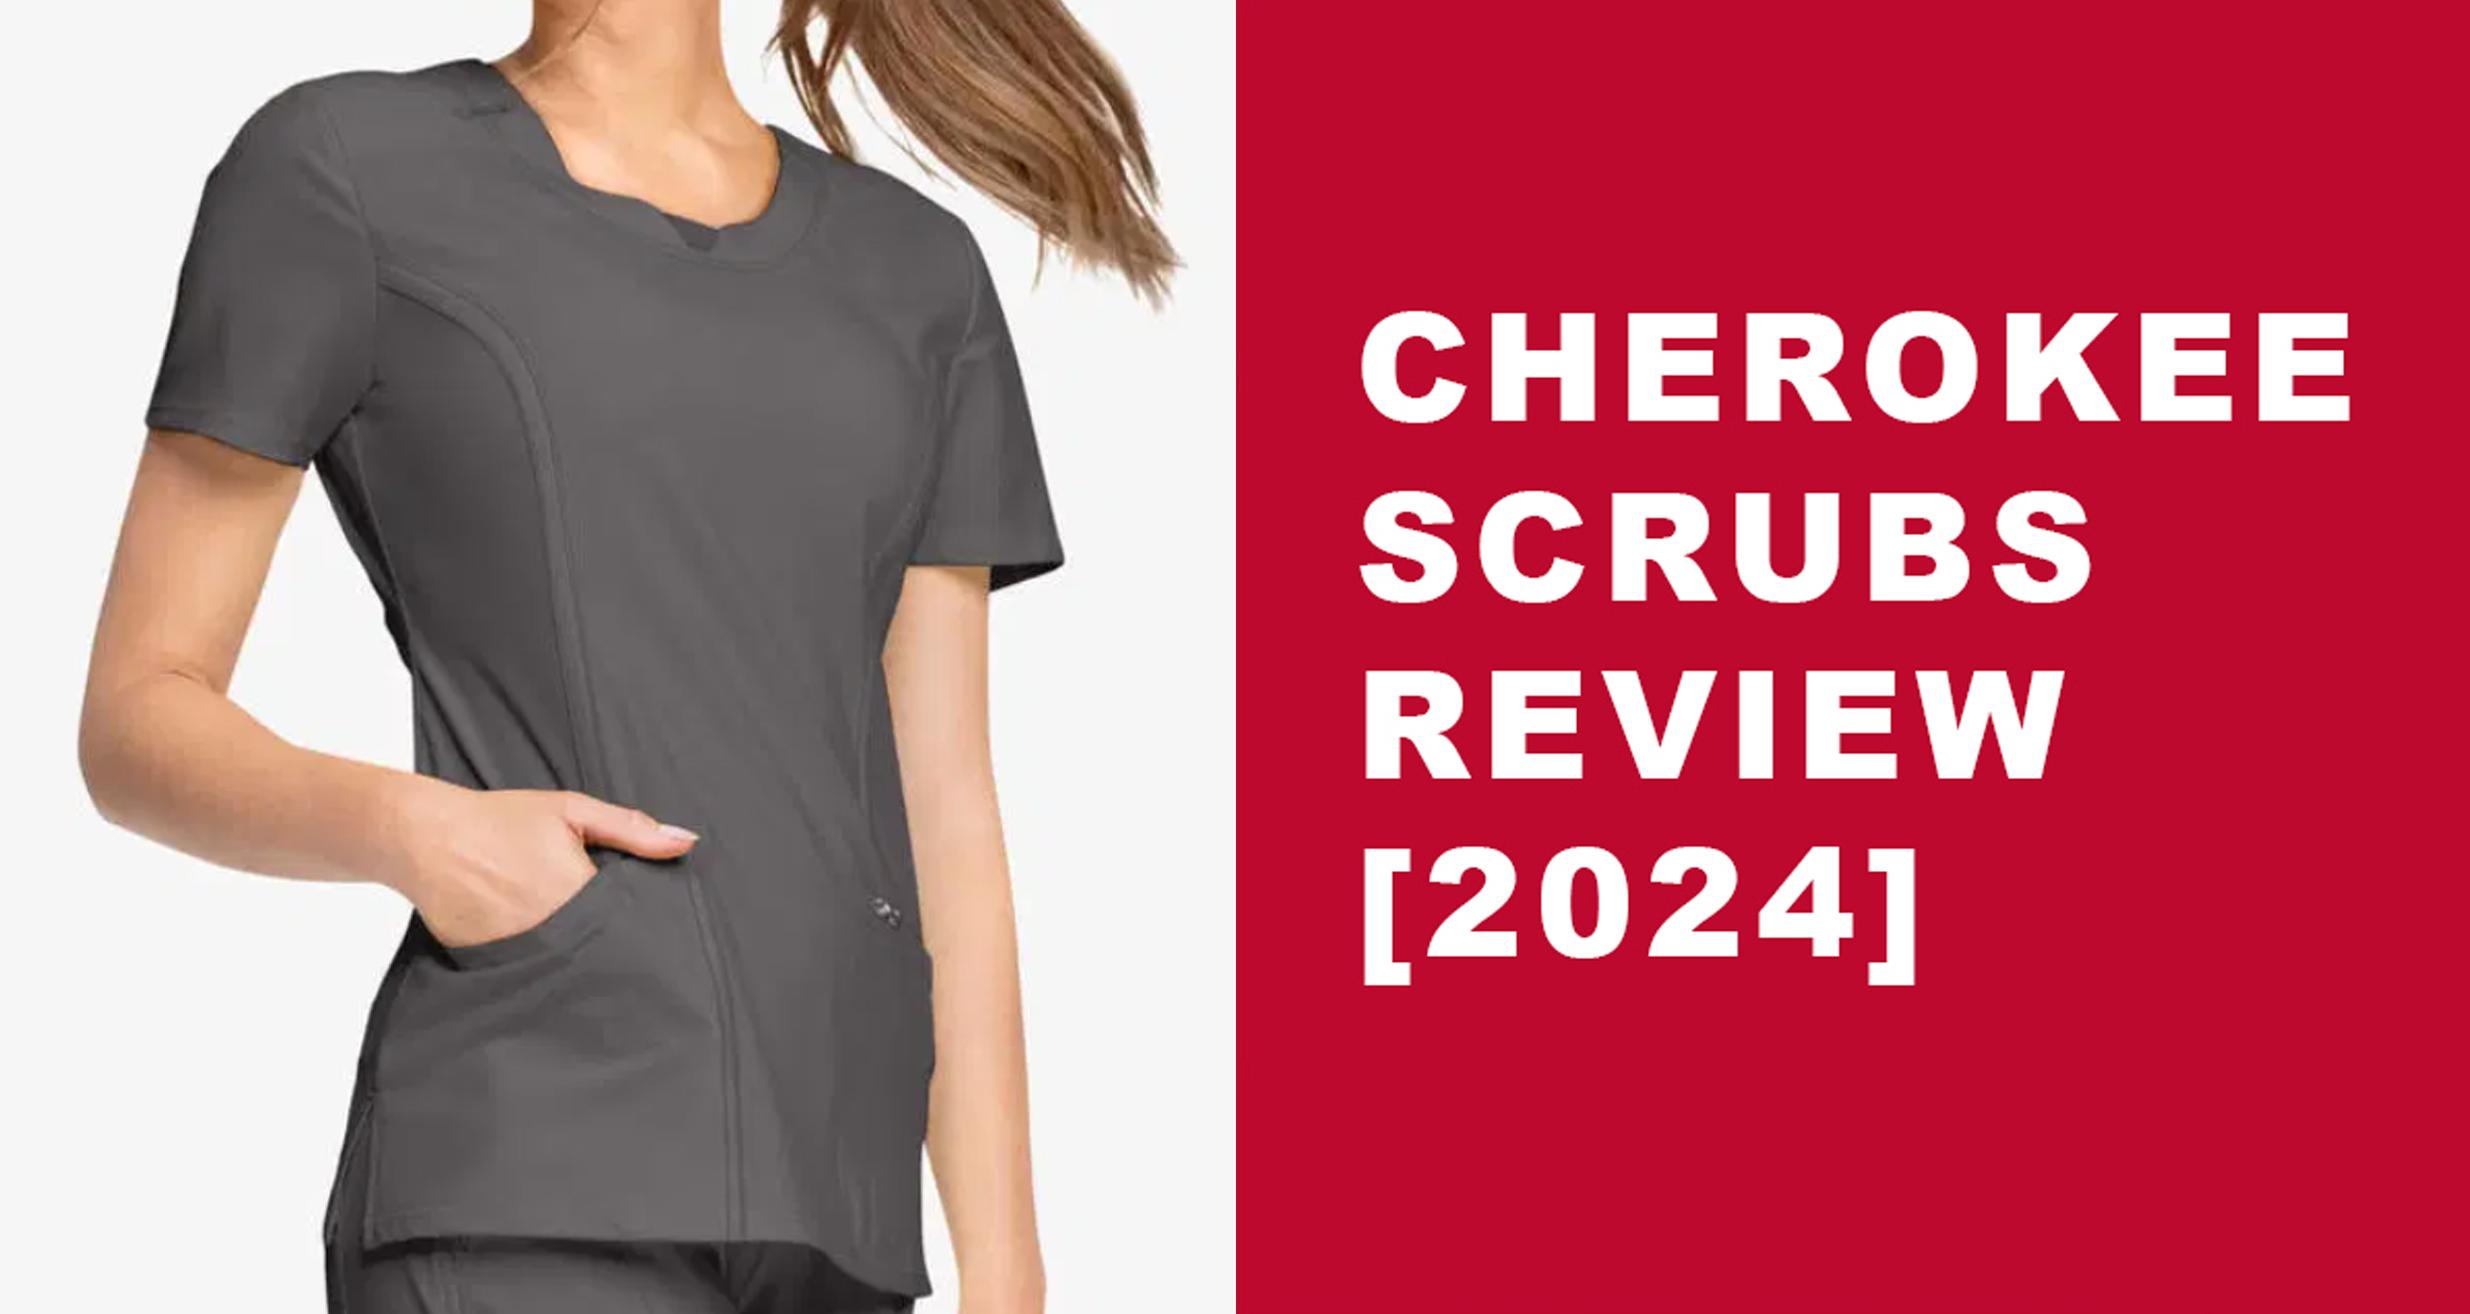 Top 5 Cherokee Scrubs Review for Singapore 2024 Guide